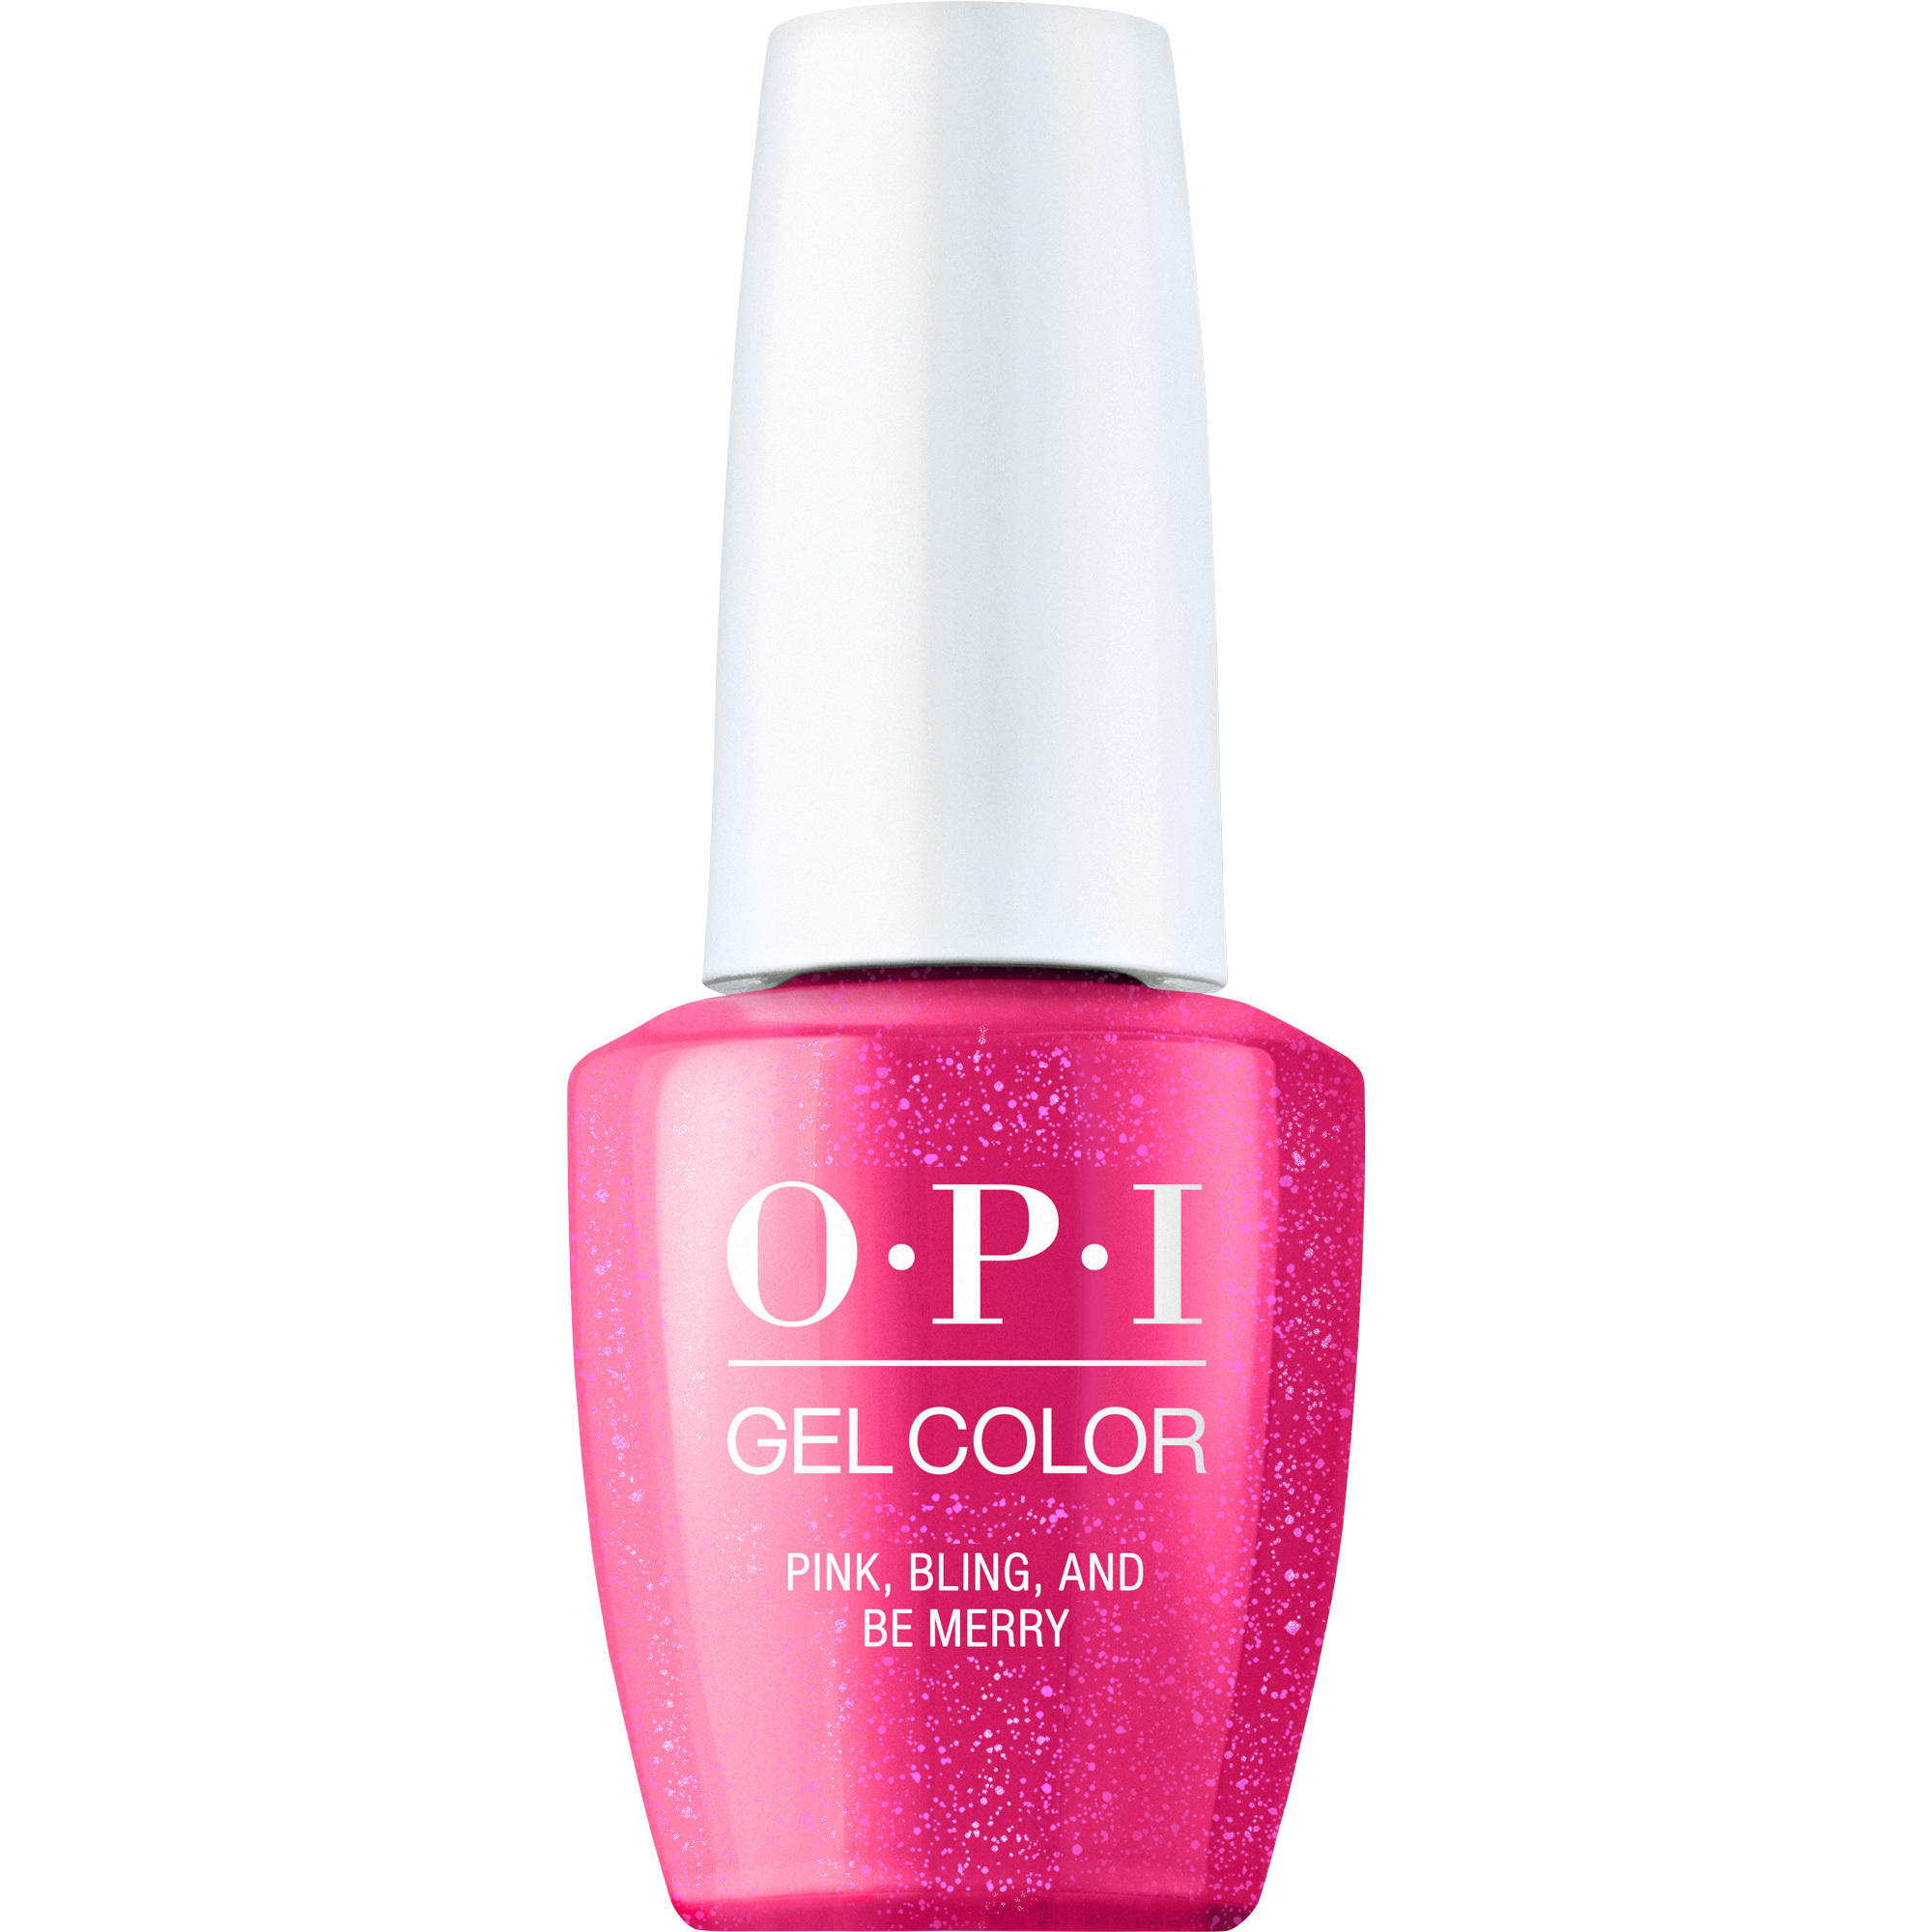 OPI Gel Color 360 - Pink, Bling & Be Merry